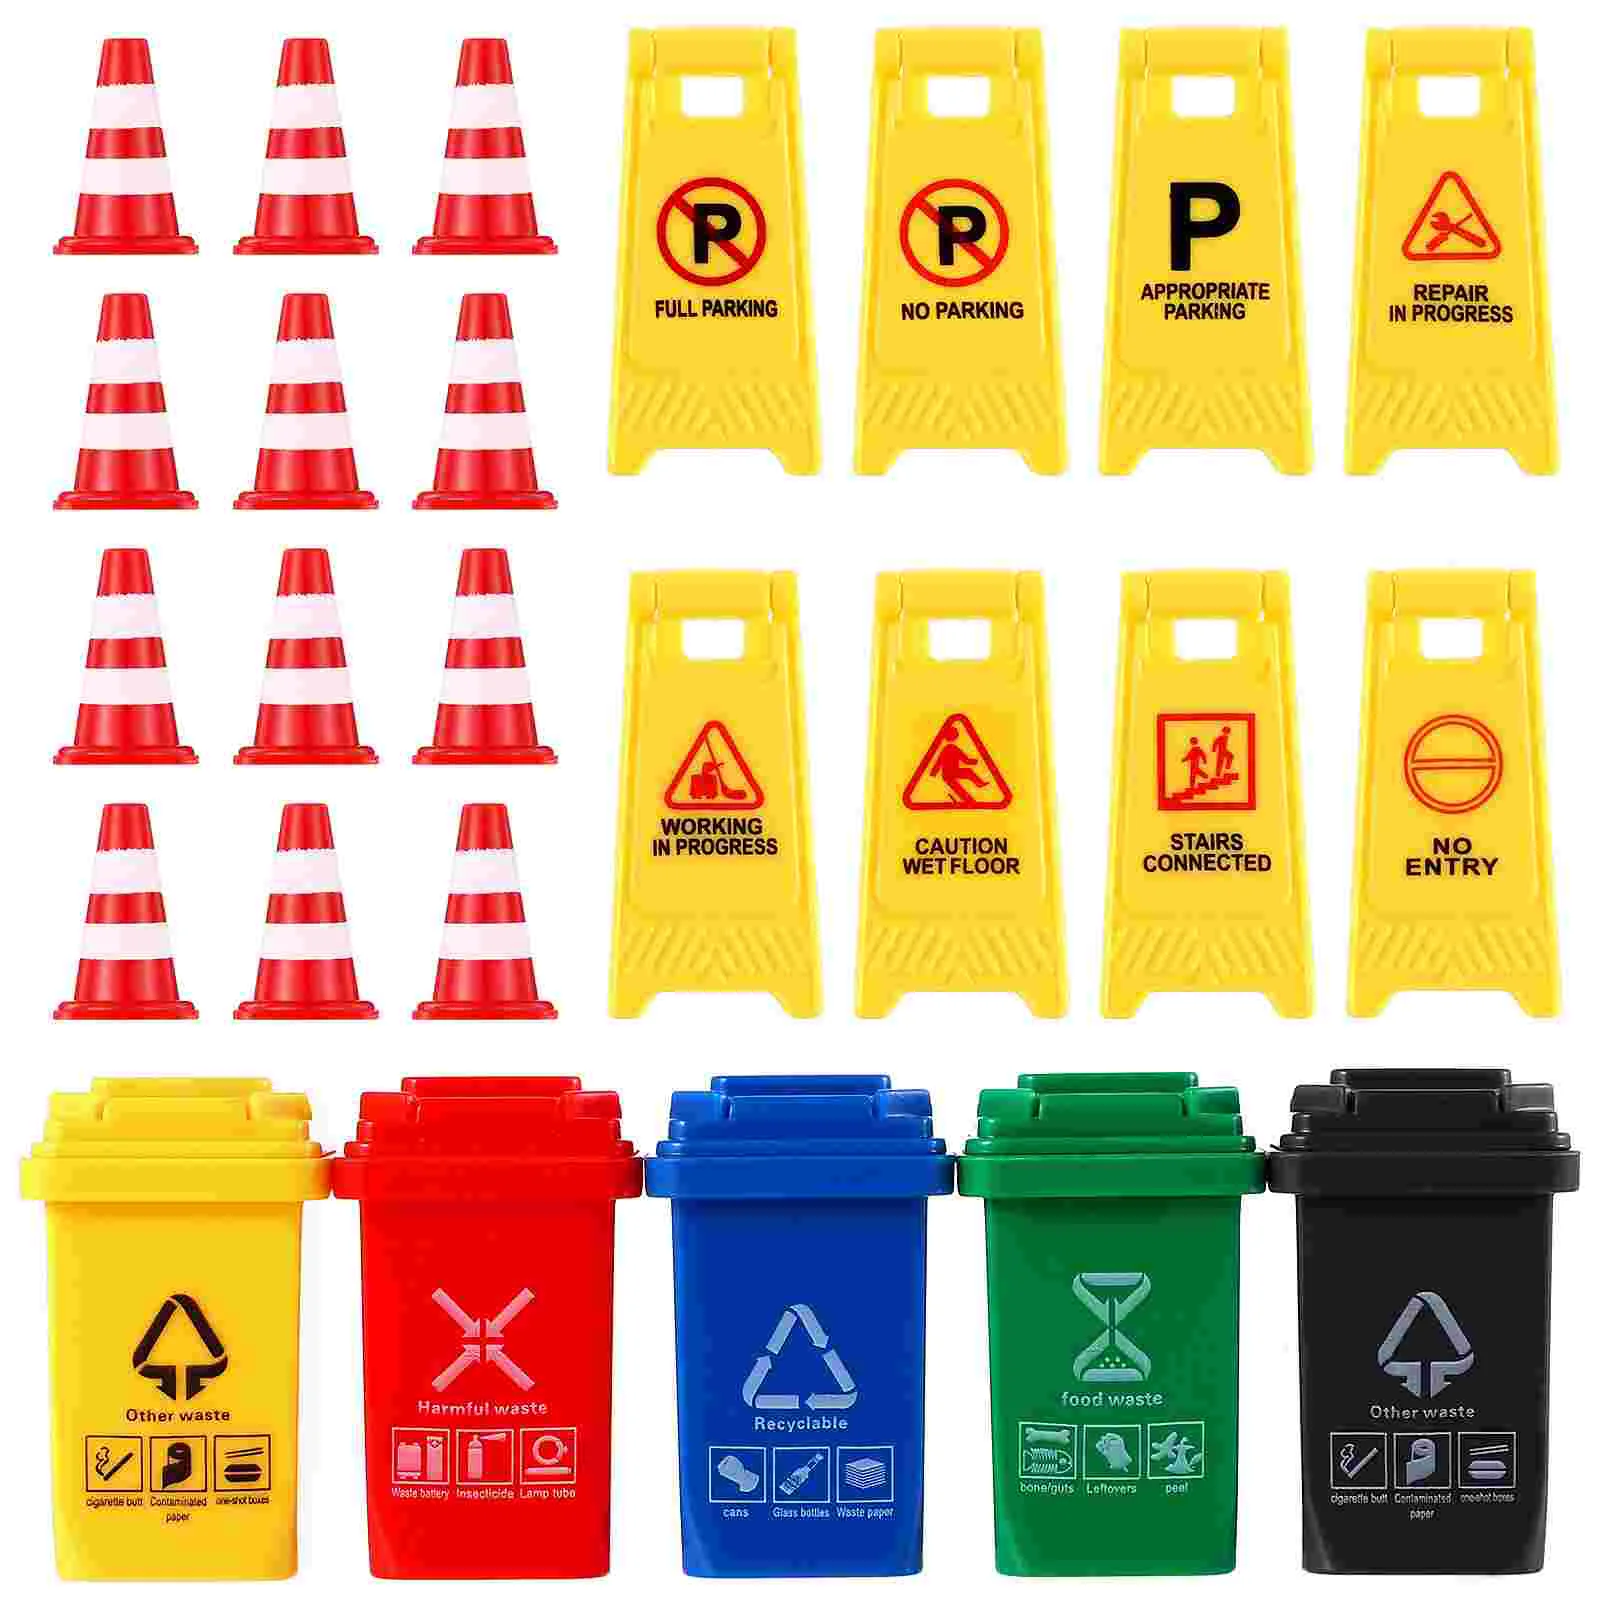 

25 Pcs Teaching Cognitive Toys Trash Cans Traffic Signs Ornament Road Game Kidcraft Playset Model